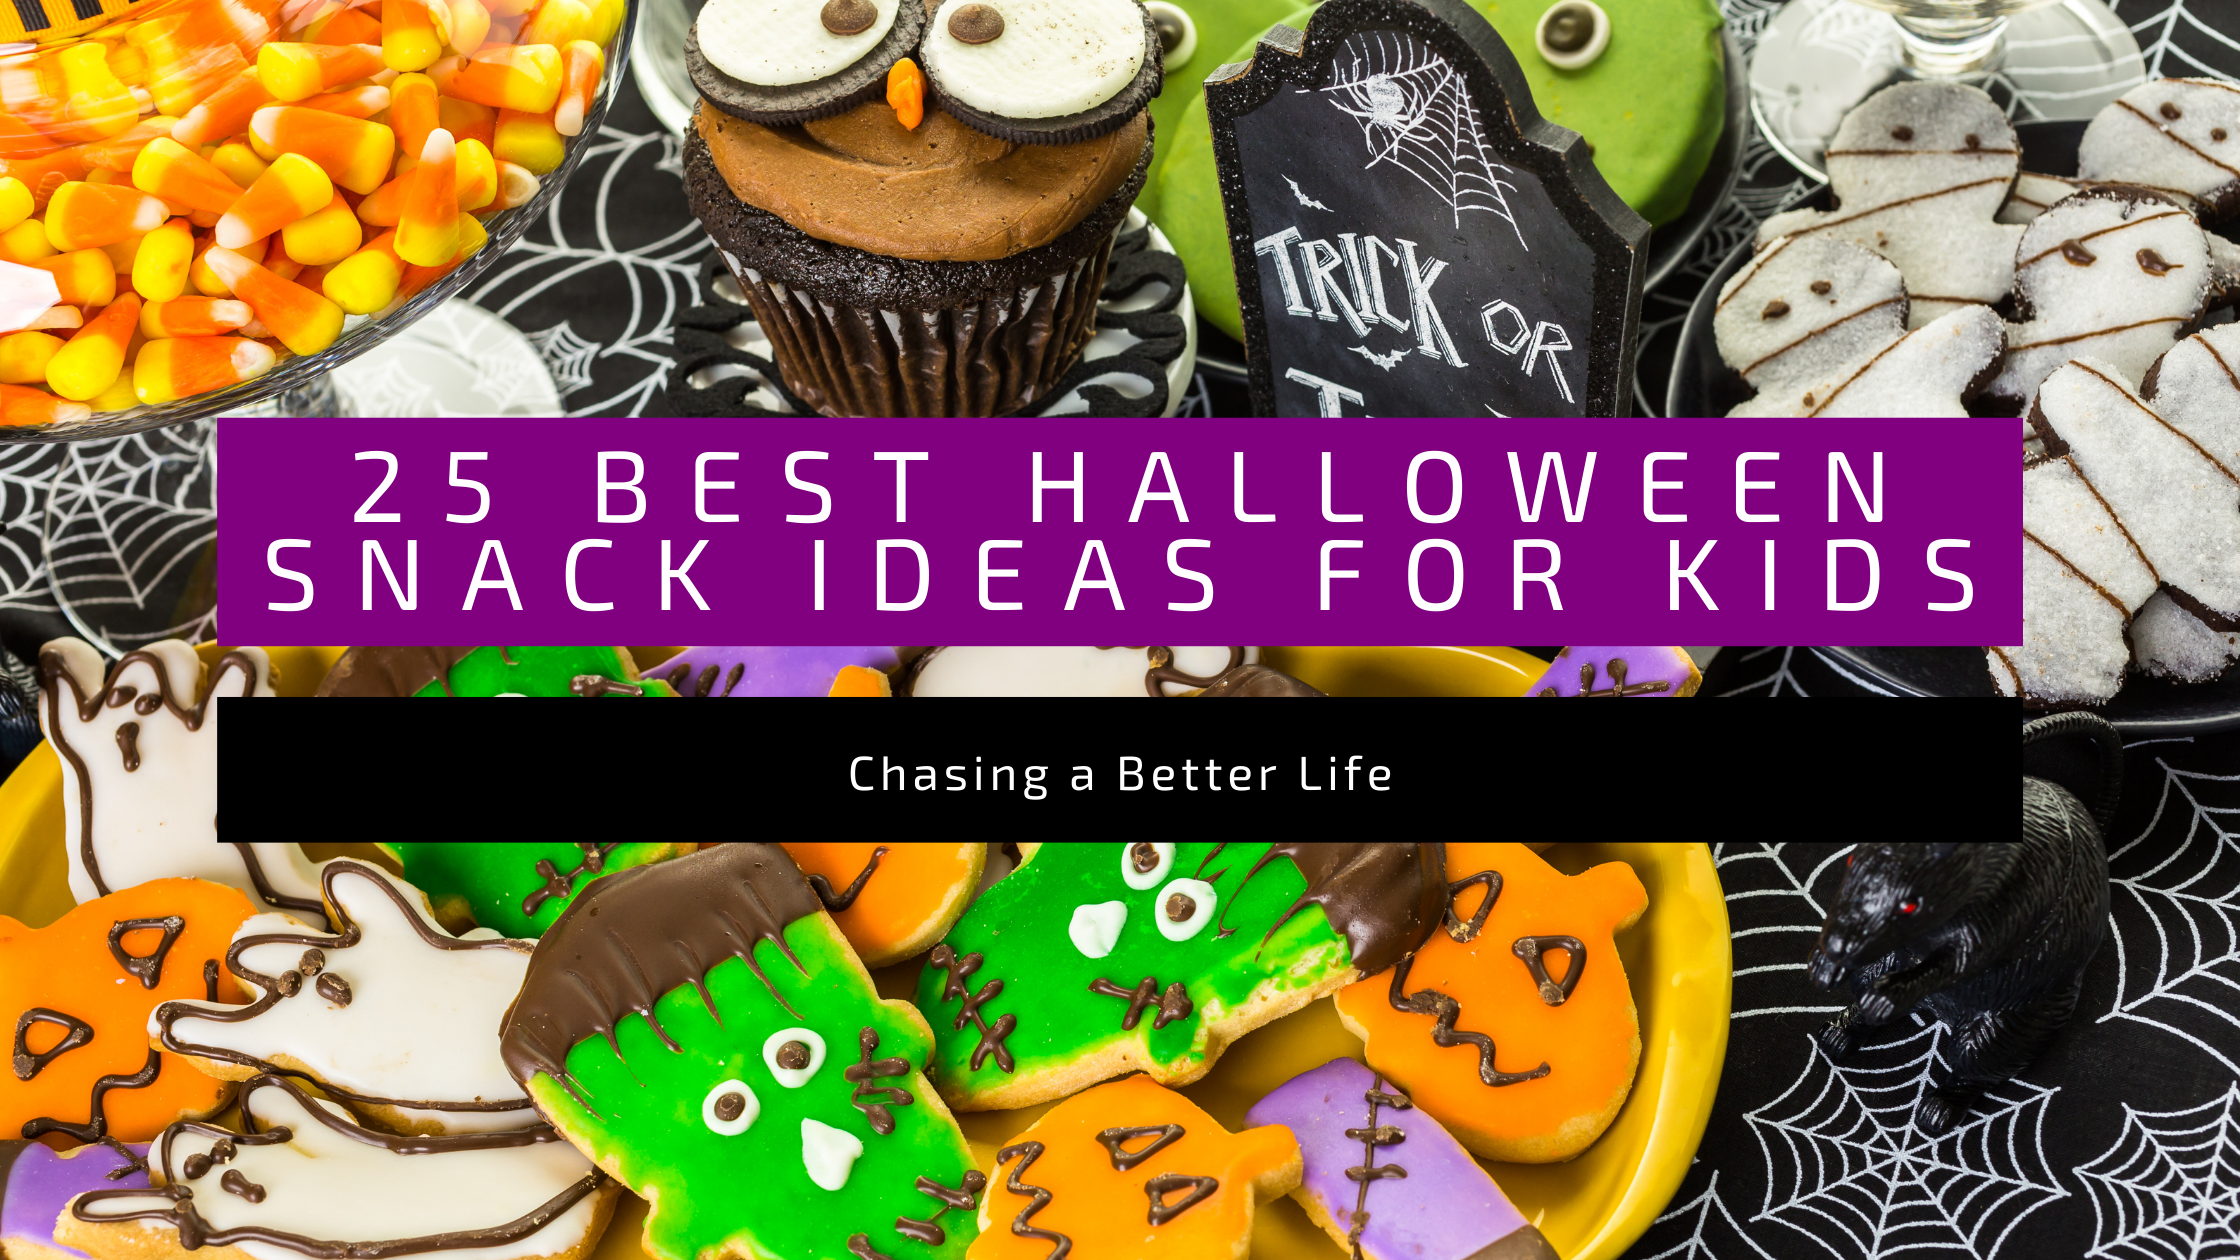 The 25 Best Halloween Snack Ideas for Kids 6